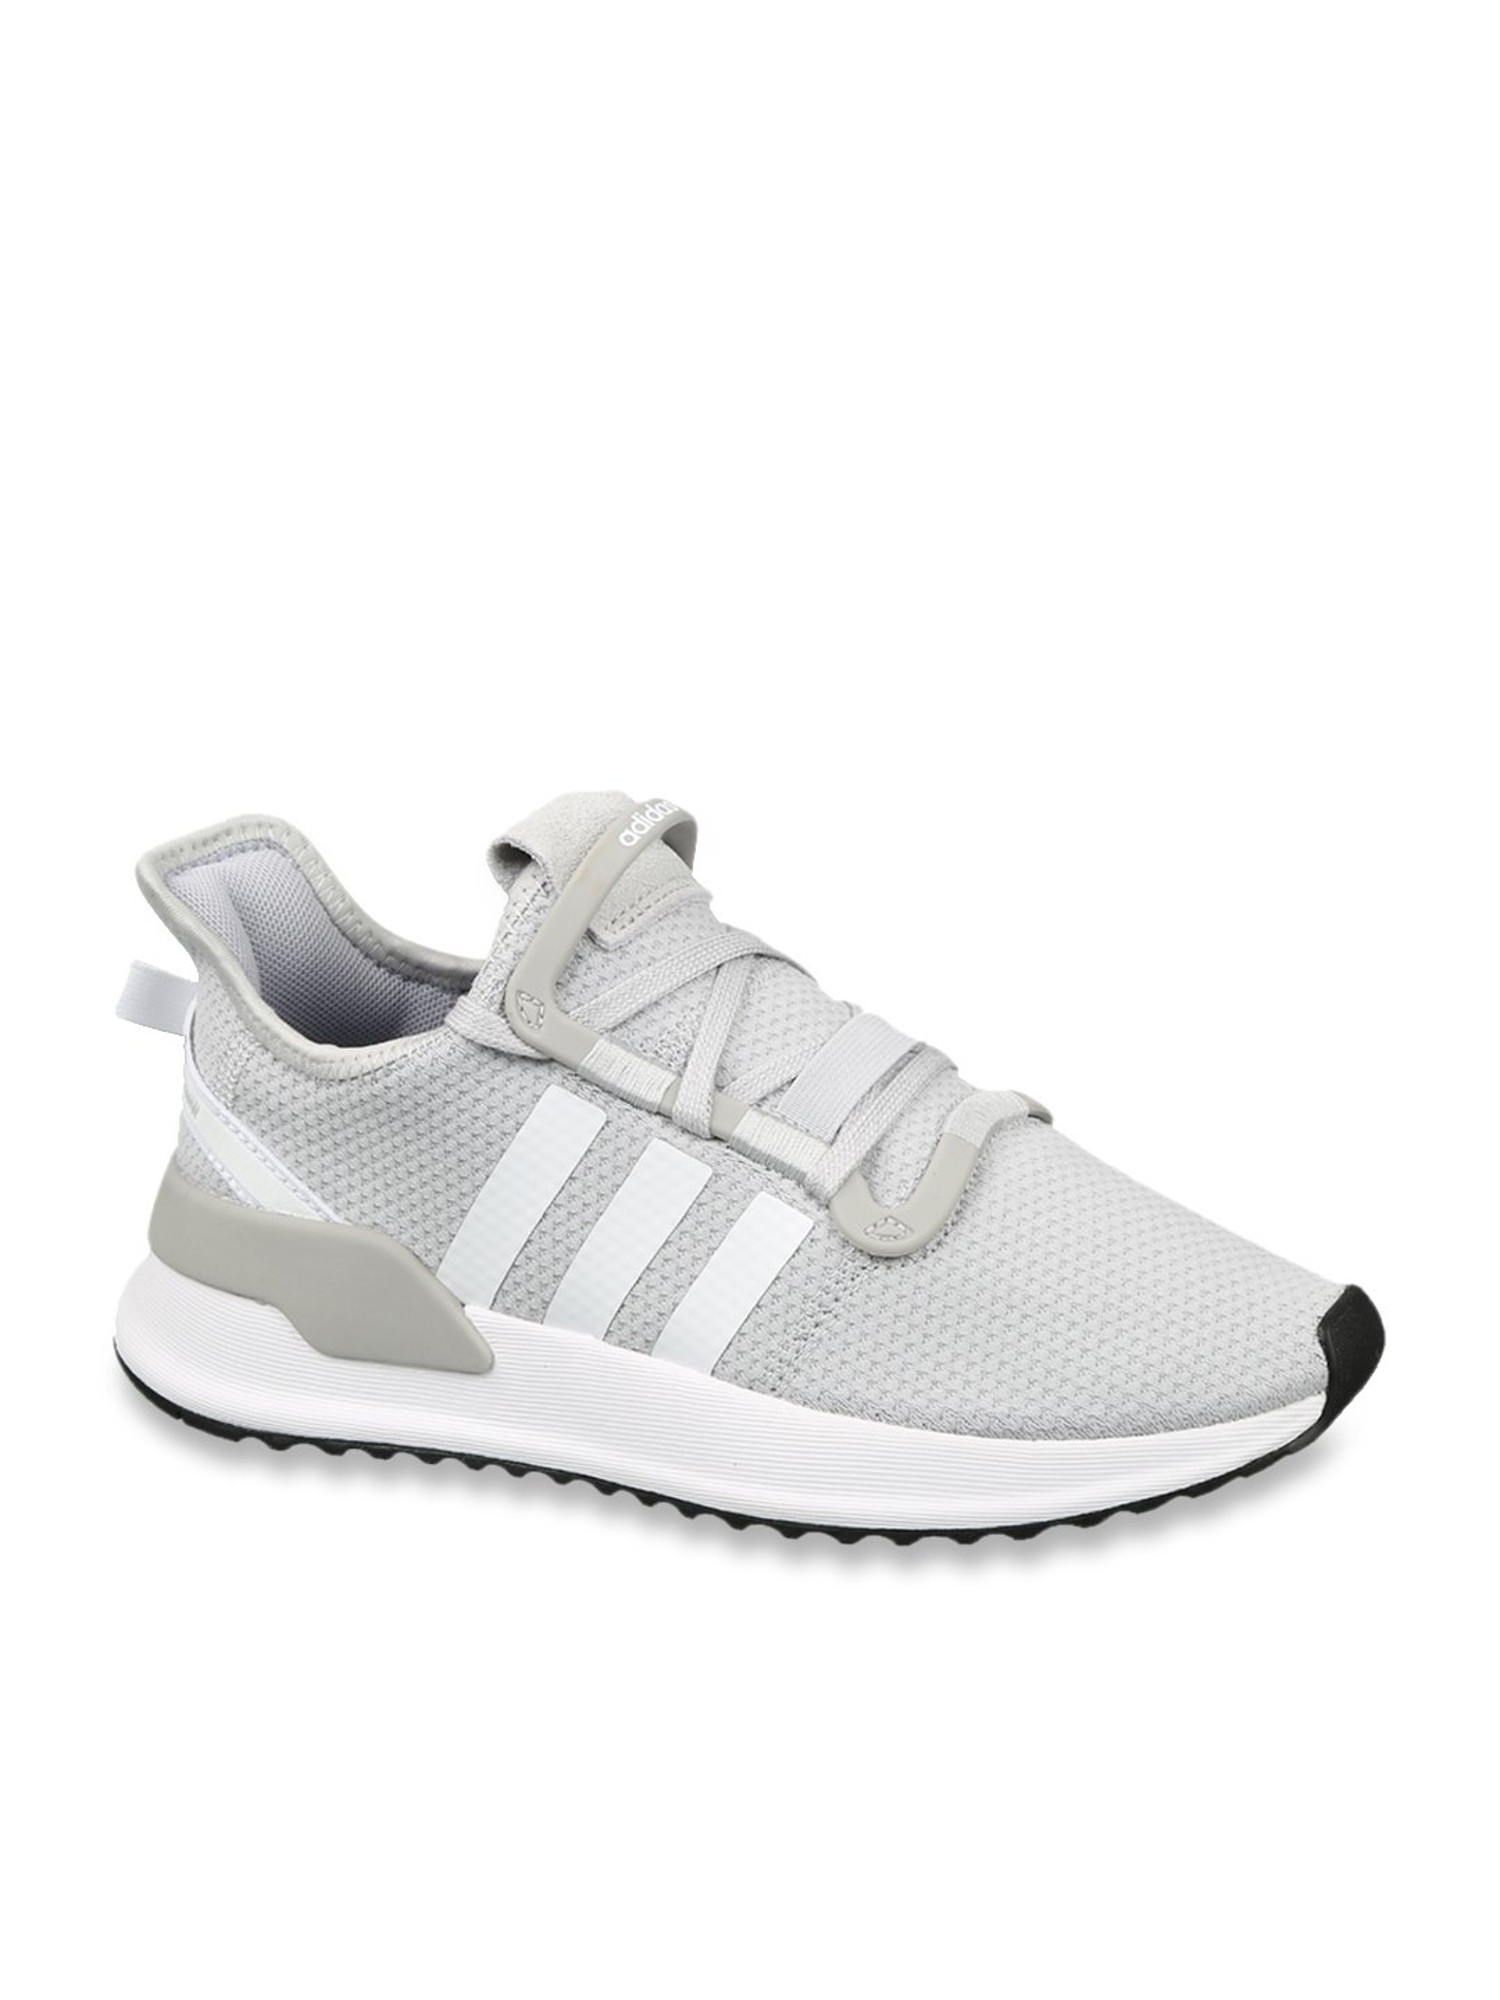 ADIDAS TELL PATH Outdoor Shoes For Men - Buy CBLACK/CARBON/GREFIV/ENER  Color ADIDAS TELL PATH Outdoor Shoes For Men Online at Best Price - Shop  Online for Footwears in India | Flipkart.com